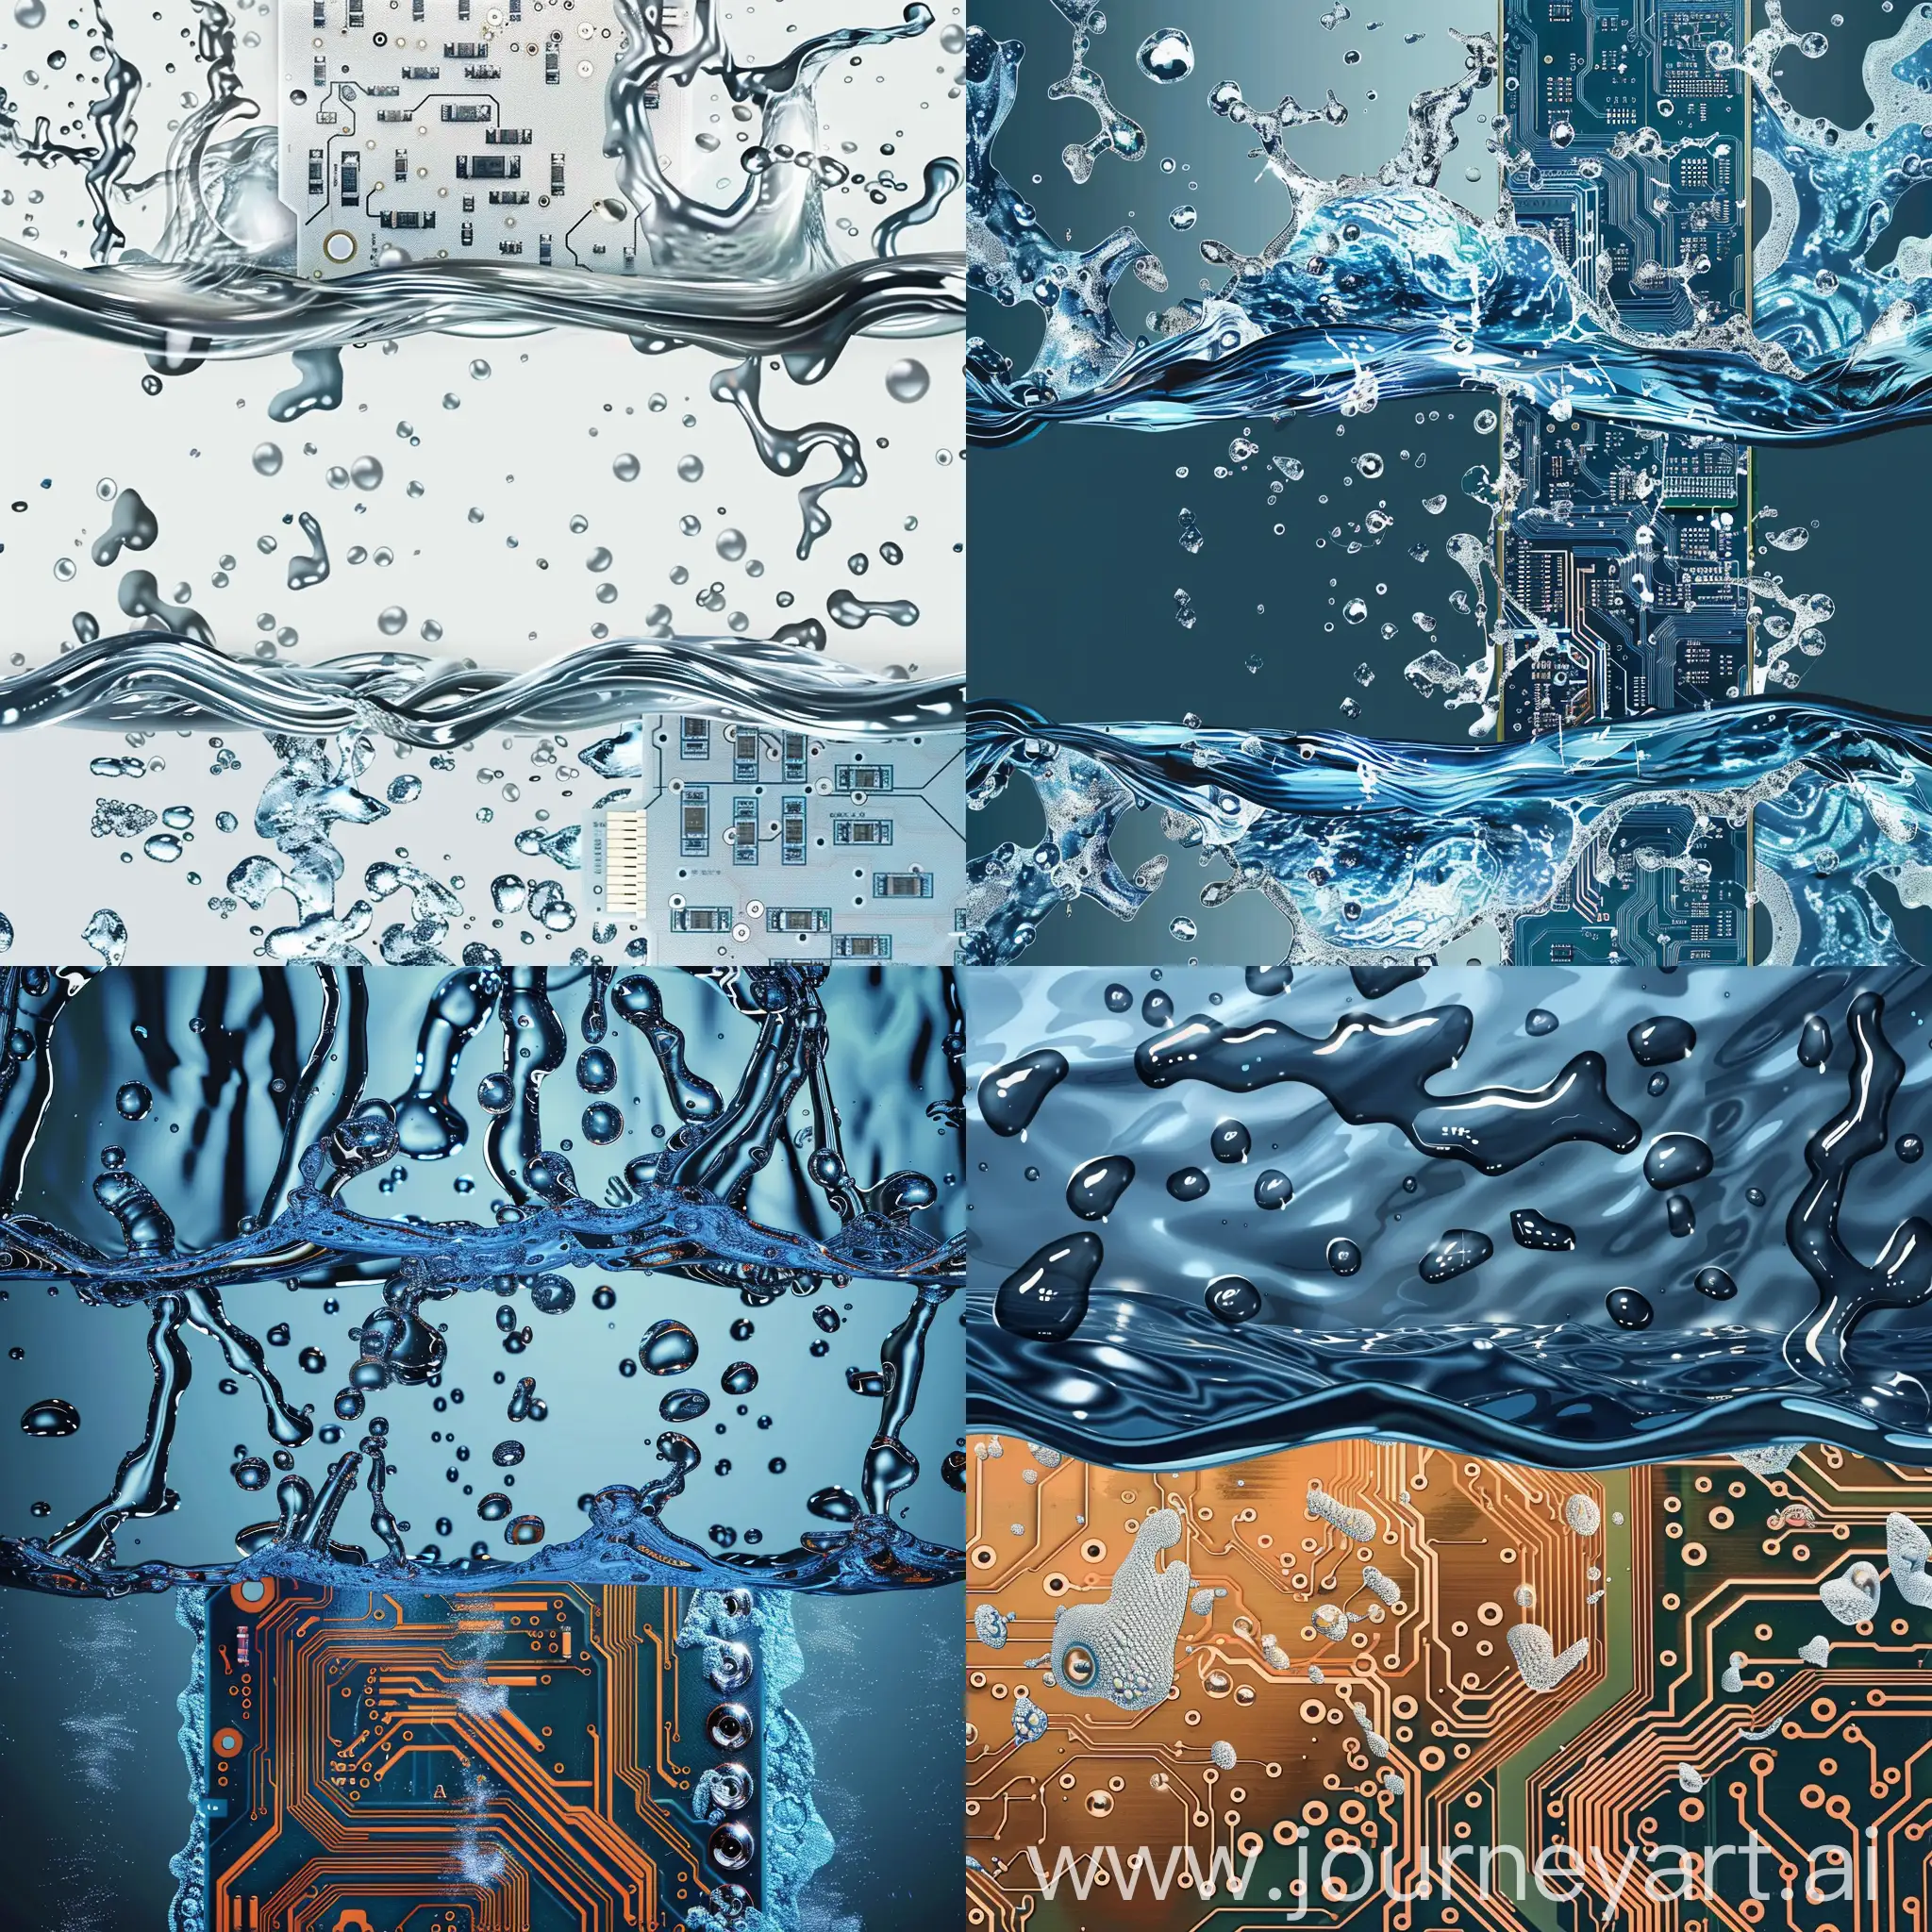 Generate a poster image of circuit board washing water with realistic texture. The poster content shows a circuit board placed horizontally and being washed with circuit board washing water, with water wave elements.